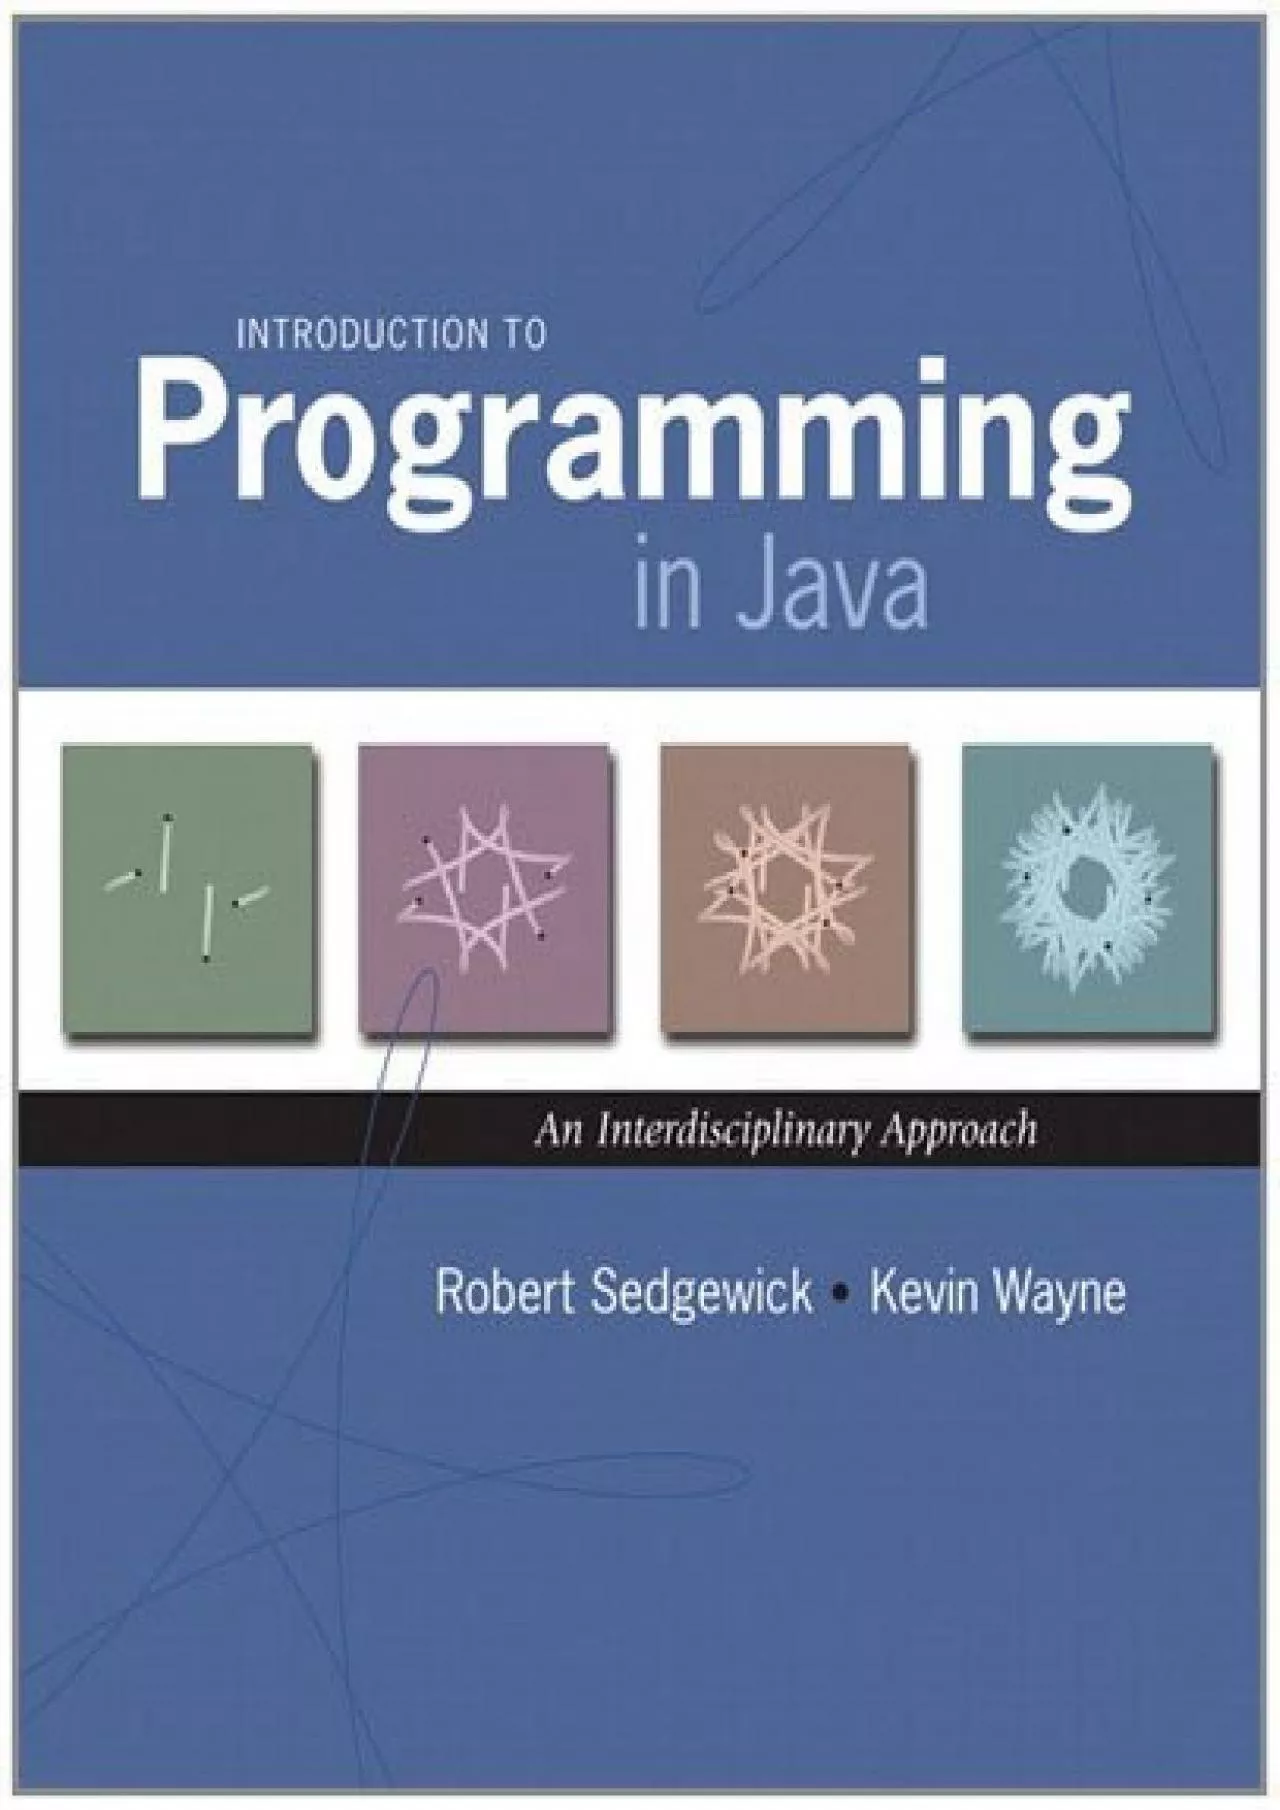 [DOWLOAD]-Introduction to Programming in Java: An Interdisciplinary Approach by Robert